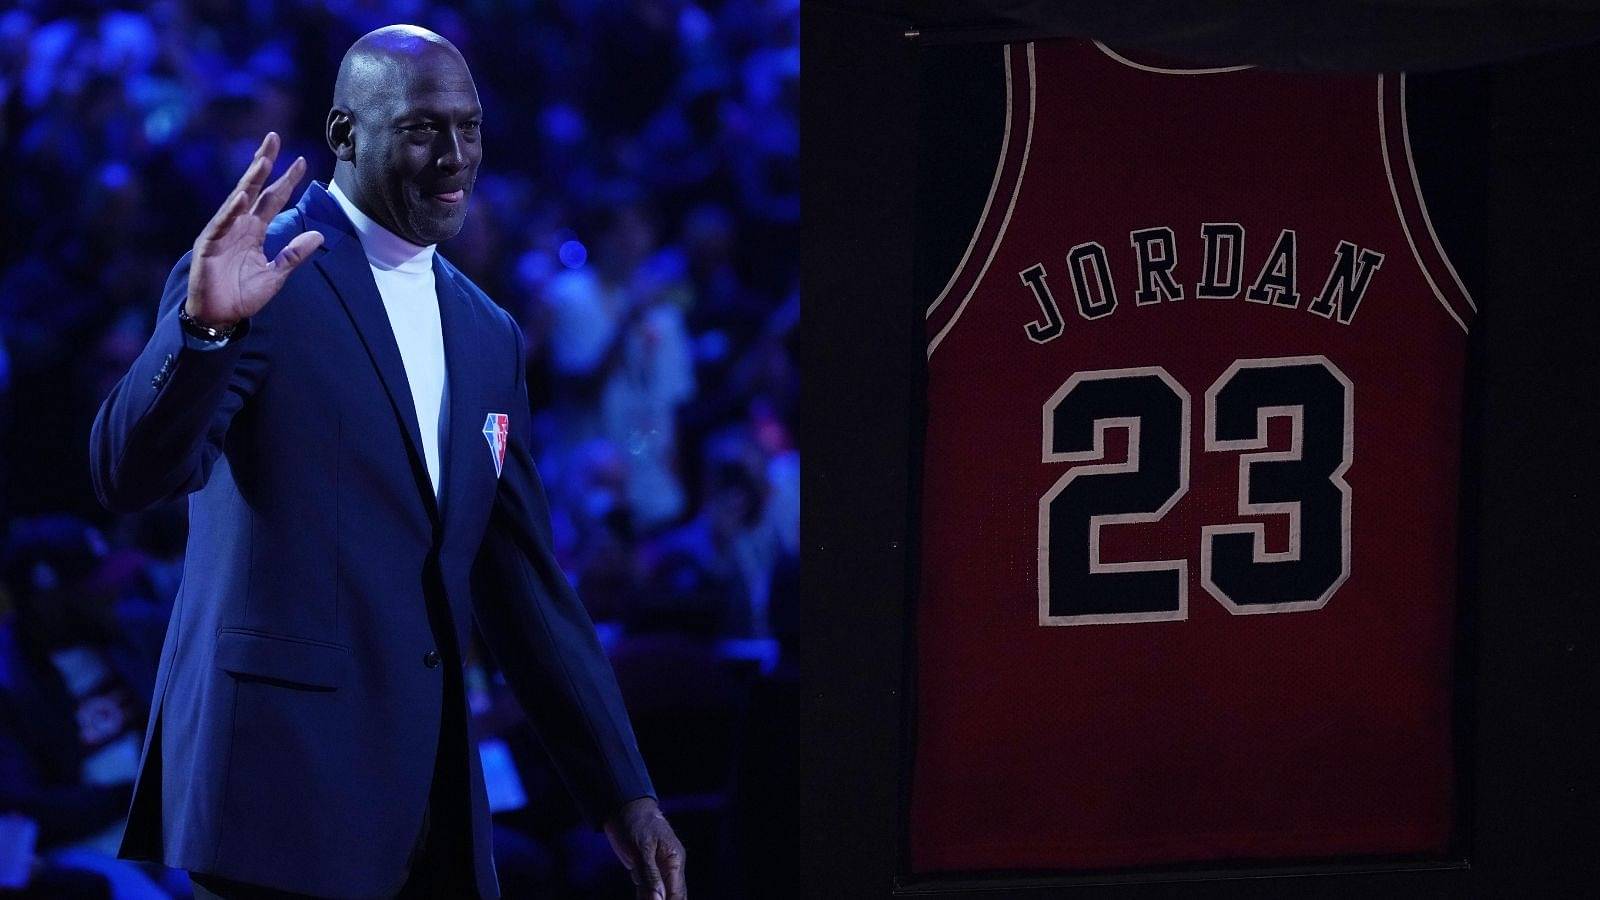 "1988 Michael Jordan averaged 45 points in the Playoffs without even attempting a three!": The Bulls' GOAT put up insane numbers en route to securing MVP, DPOY, and the scoring title